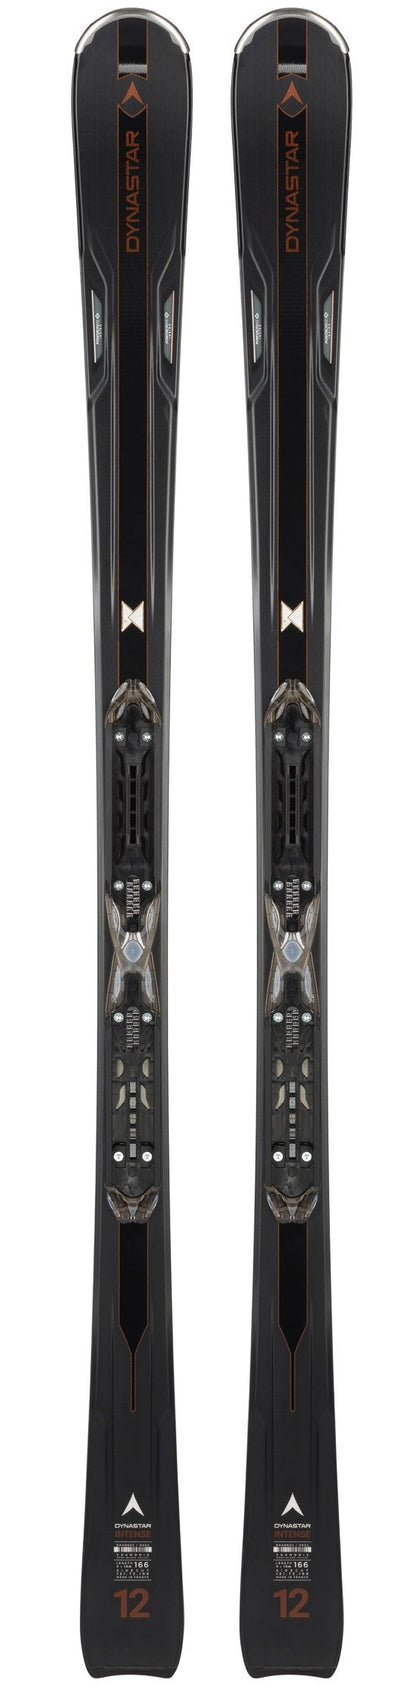 2019 Dynastar Intense 12 ladies snow skis (CLEARANCE) - ProSkiGuy your Hometown Ski Shop on the web